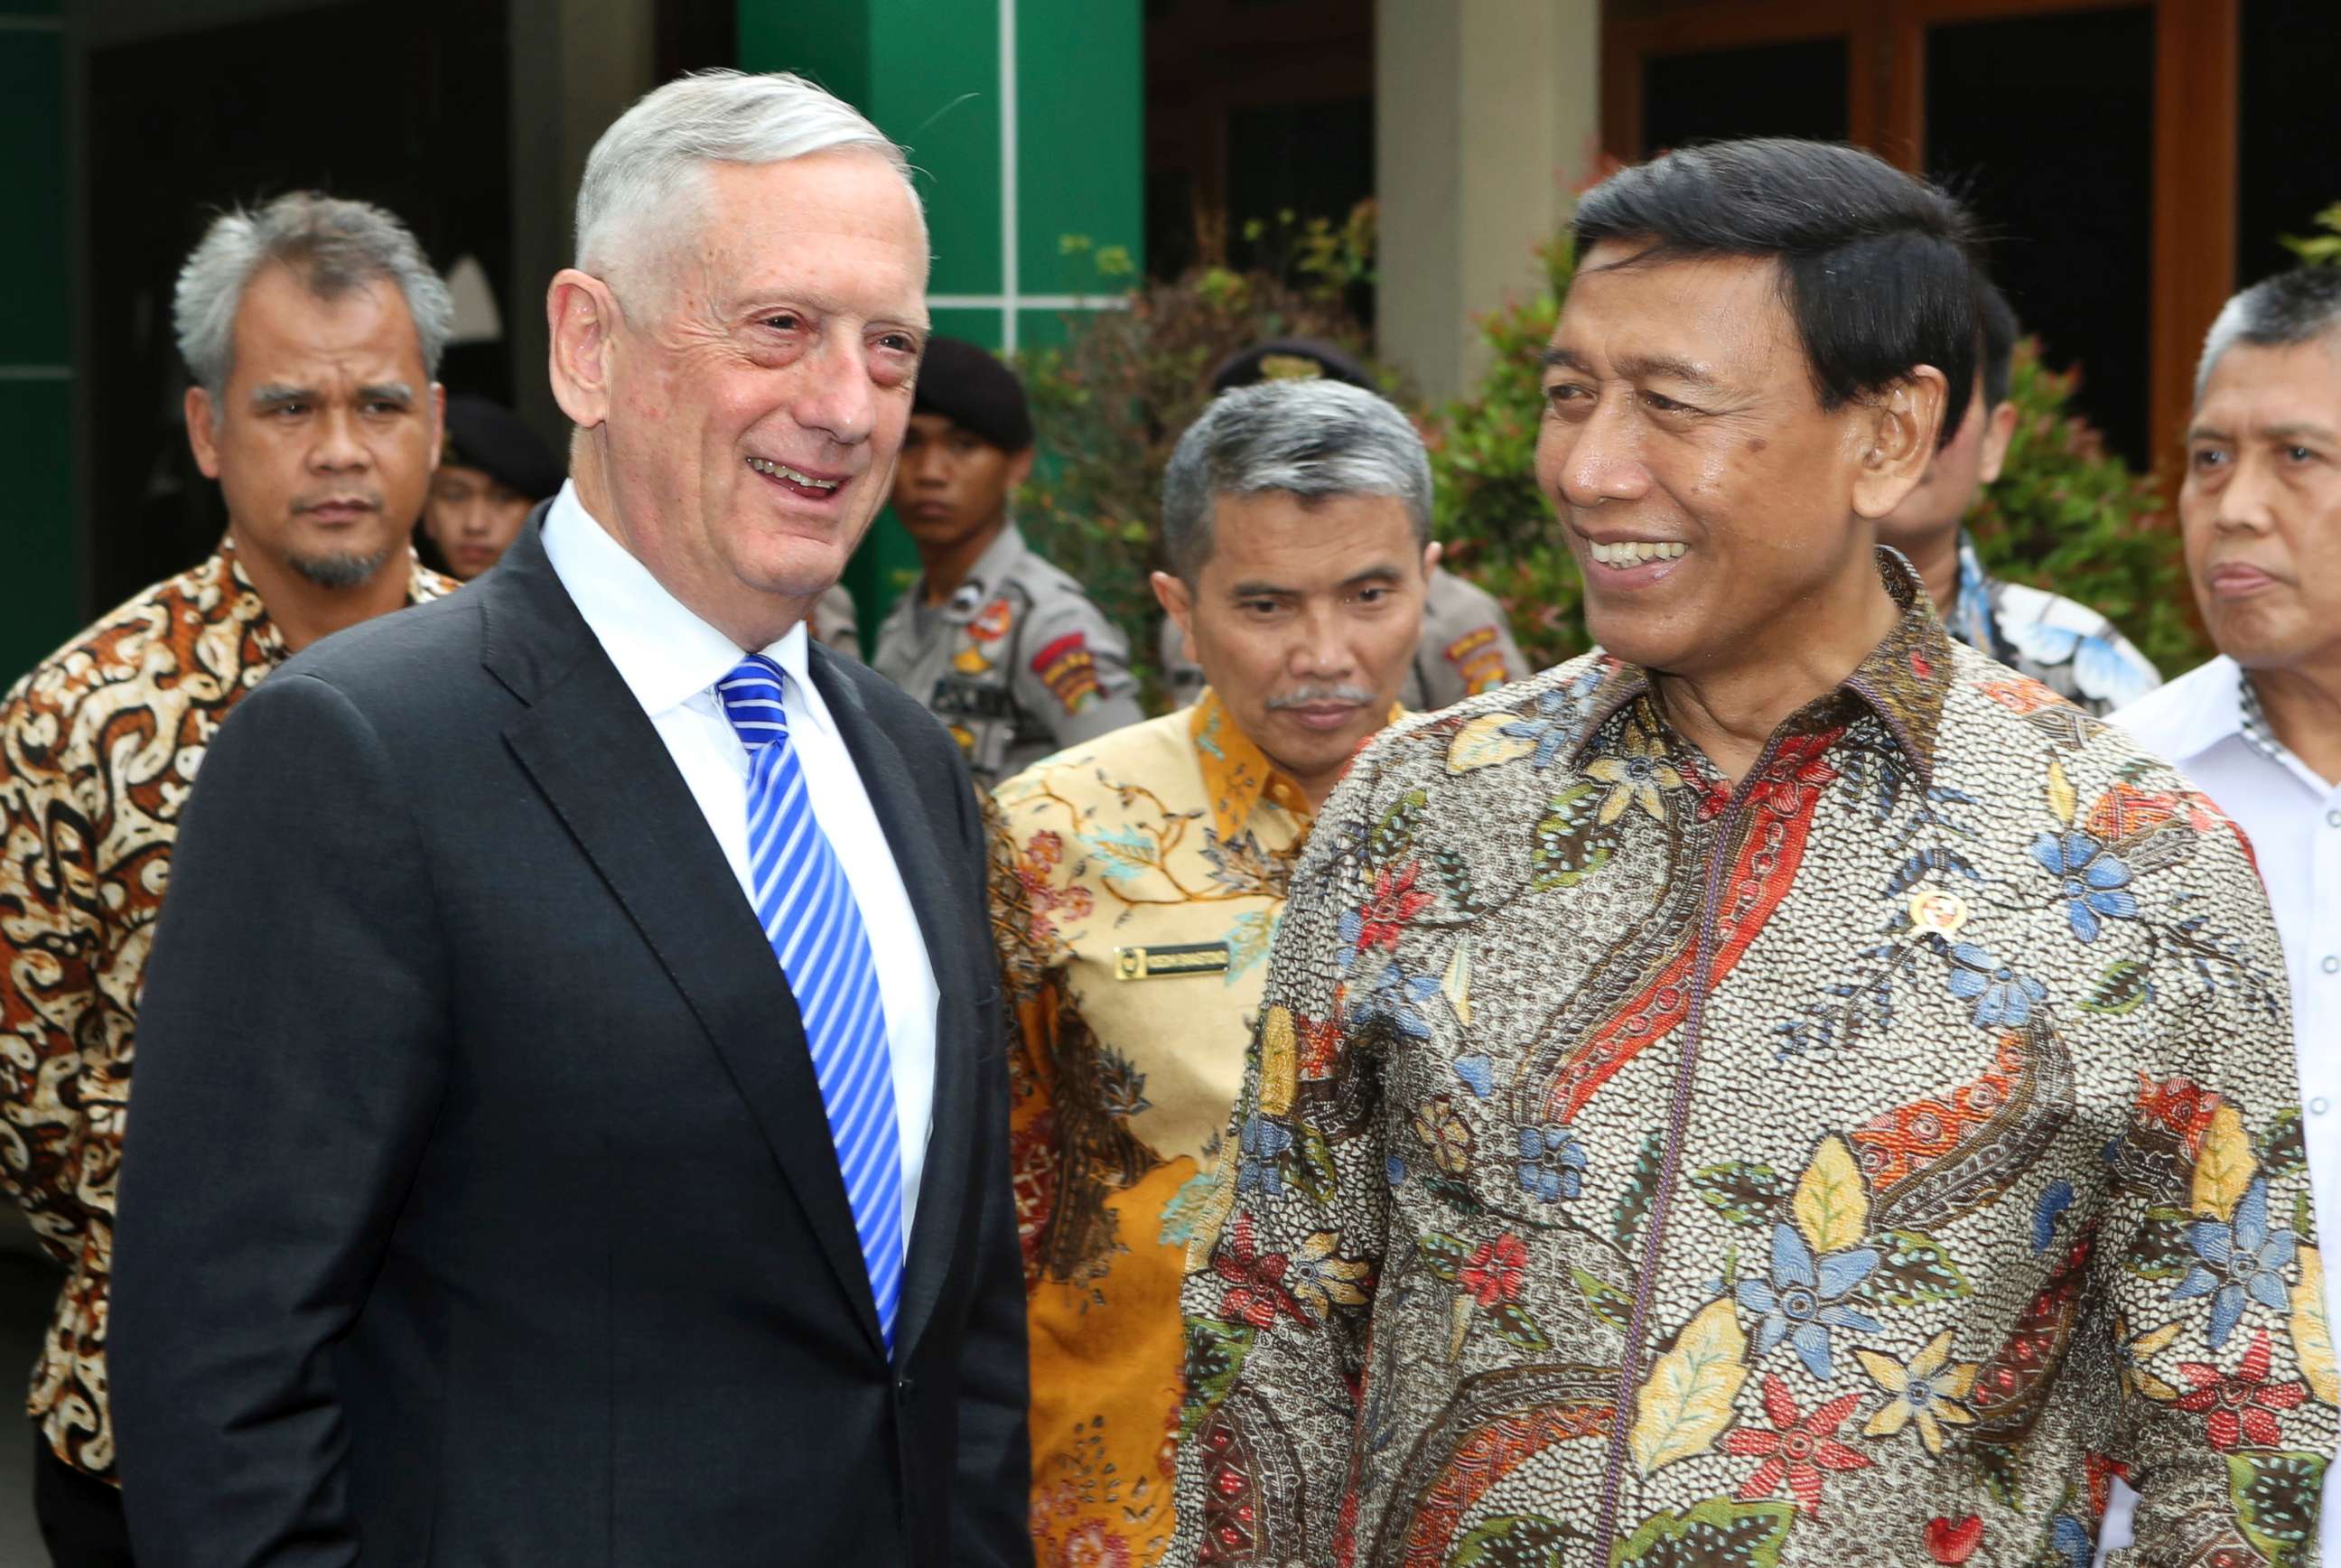 PHOTO: U.S. Defense Secretary Jim Mattis, left, smiles with Indonesian Coordinating Minister for Politics, Security and Law Wiranto after a meeting in Jakarta, Indonesia, Jan. 23, 2018.